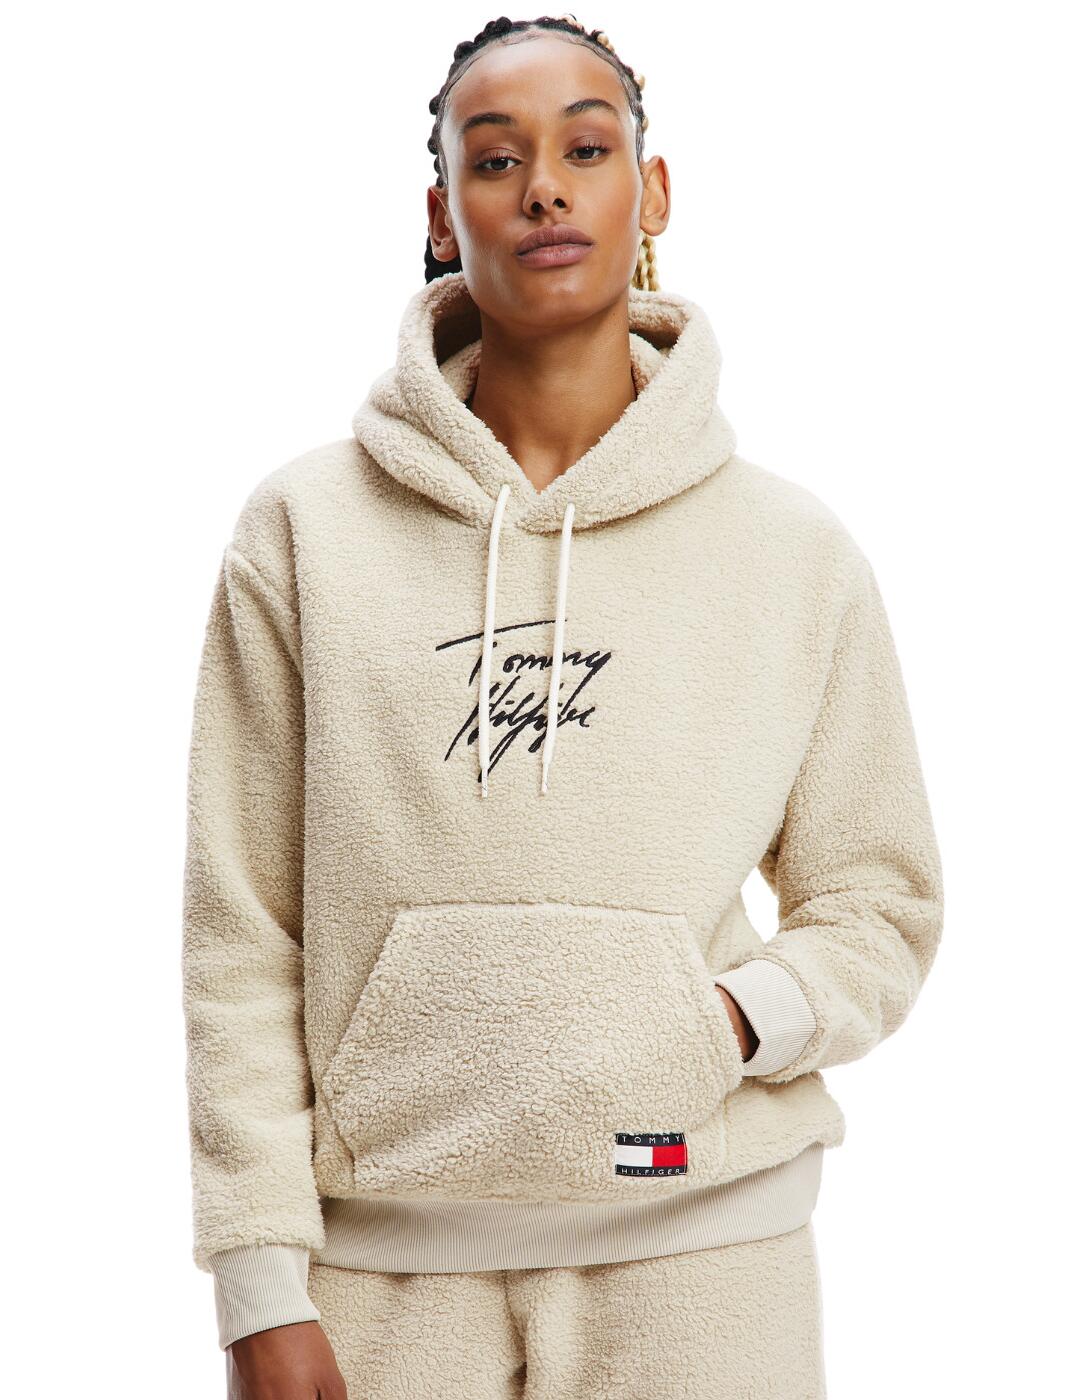 From bark Consider Tommy Hilfiger Tommy 85 Sherpa Hoodie - Belle Lingerie | Tommy Hilfiger  Tommy 85 Sherpa Hoodie - Belle Lingerie